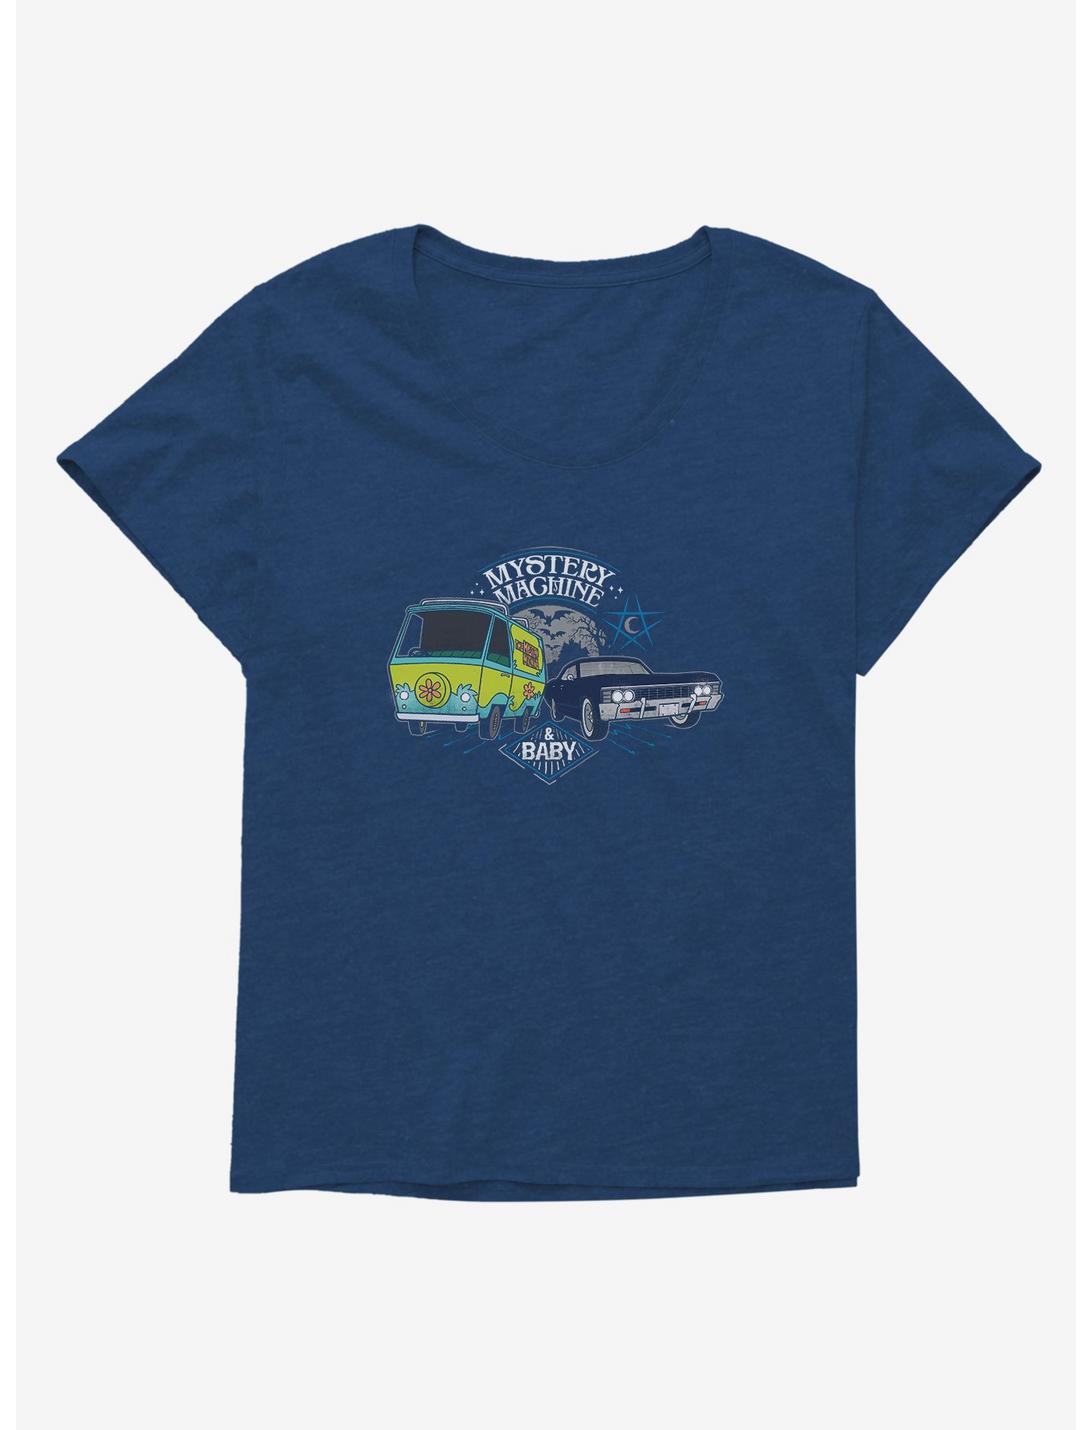 Supernatural Scoobynatural Mystery Machine & Baby Womens T-Shirt Plus Size, ATHLETIC NAVY, hi-res